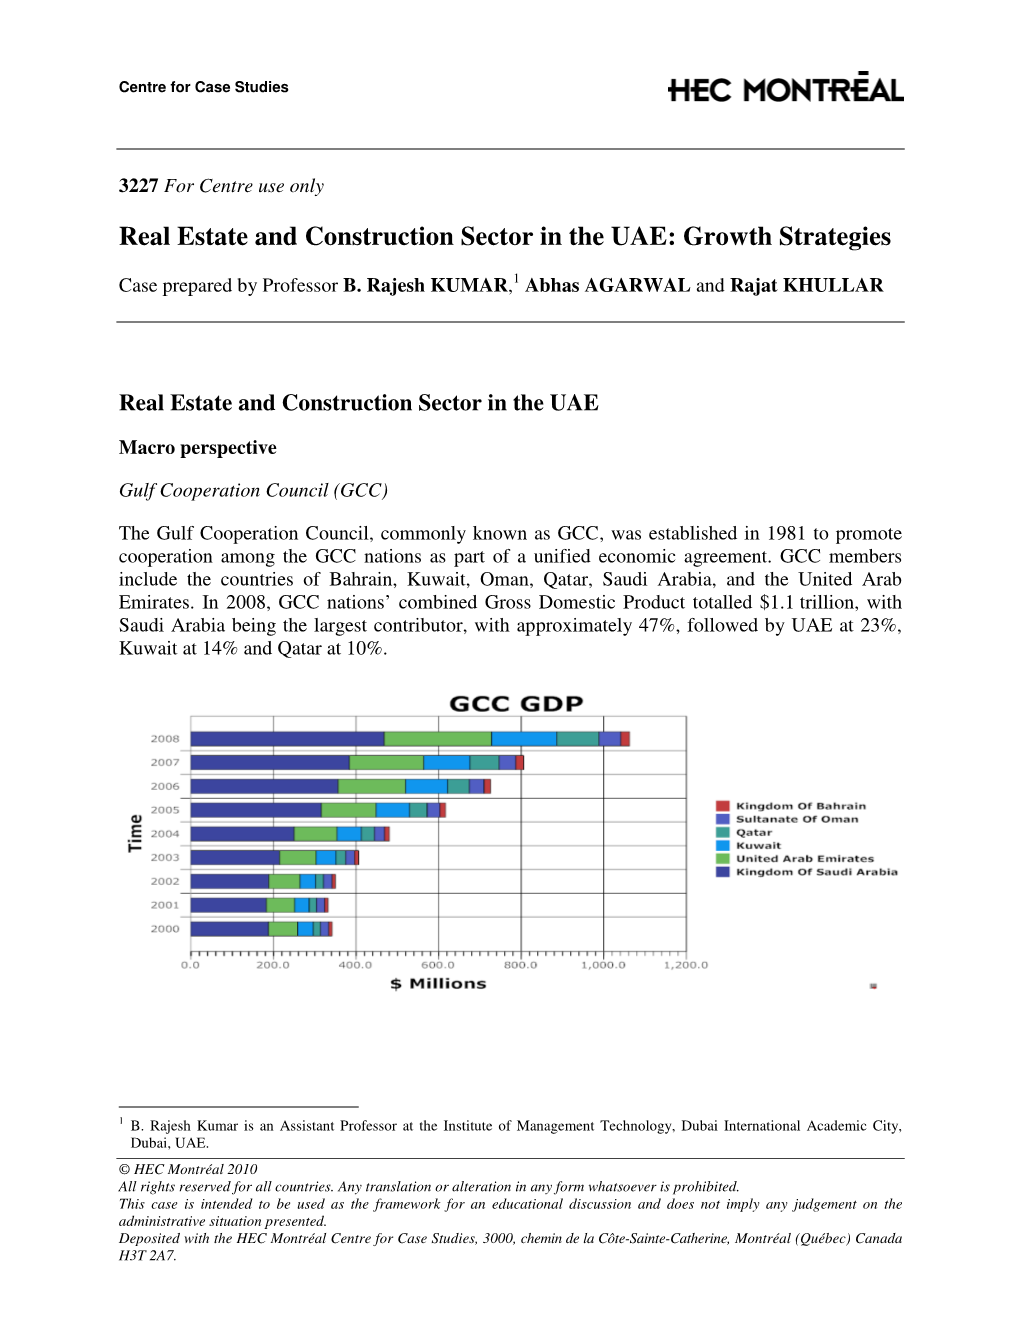 Real Estate and Construction Sector in the UAE: Growth Strategies